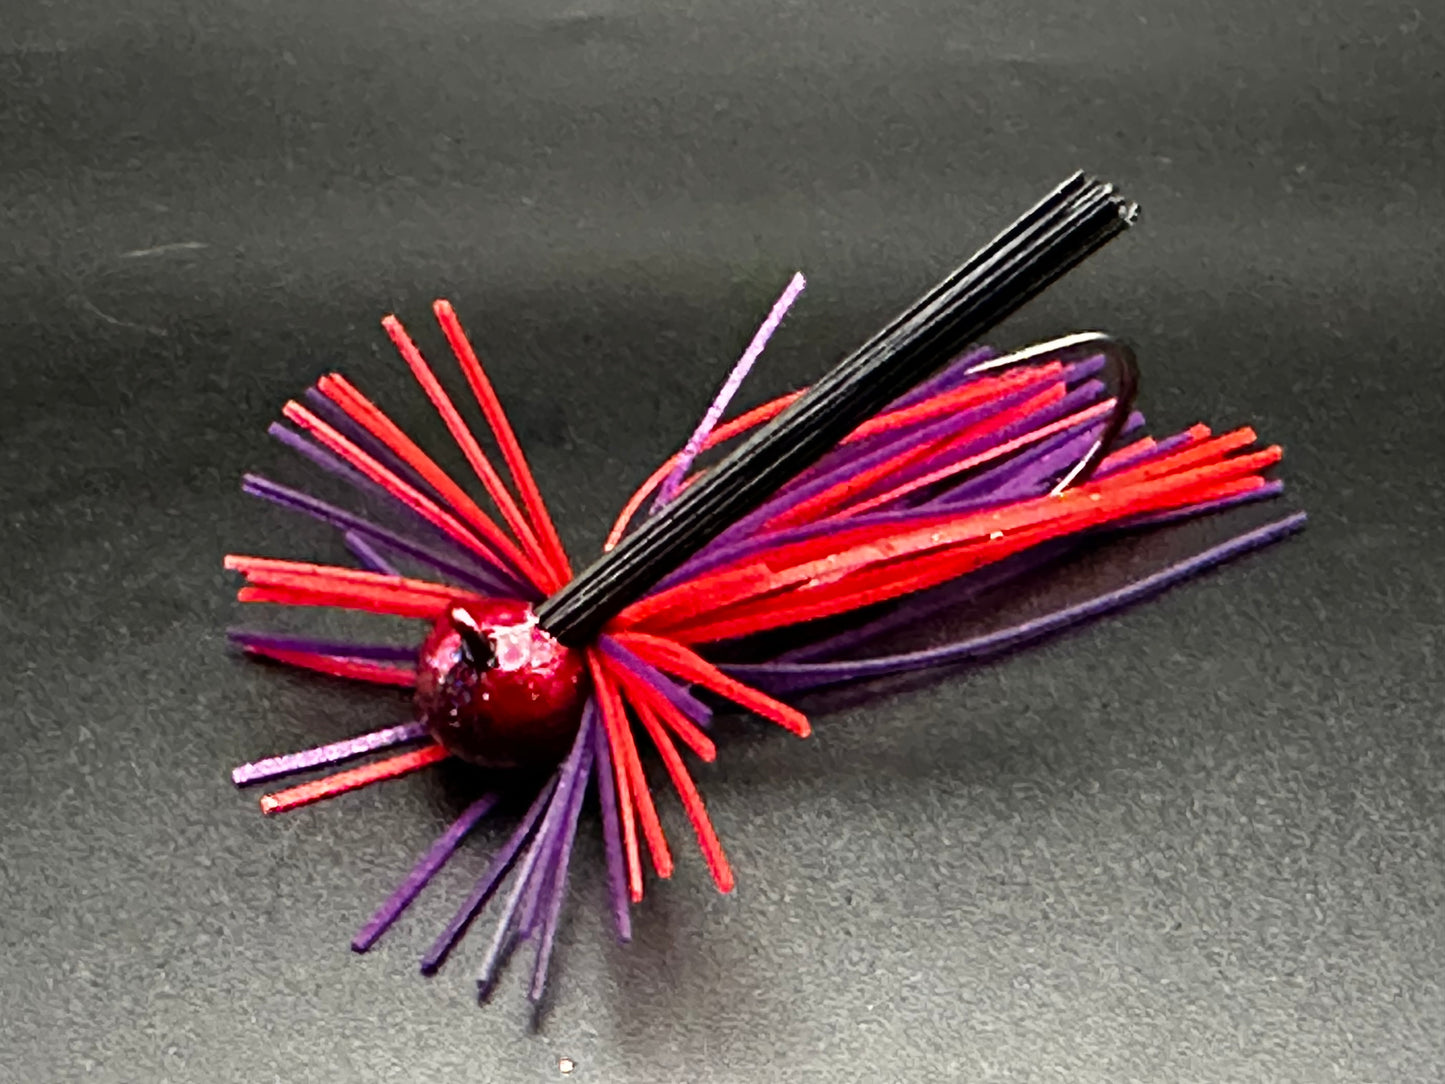 Finesse Jig - 1 Jig wire tied by hand